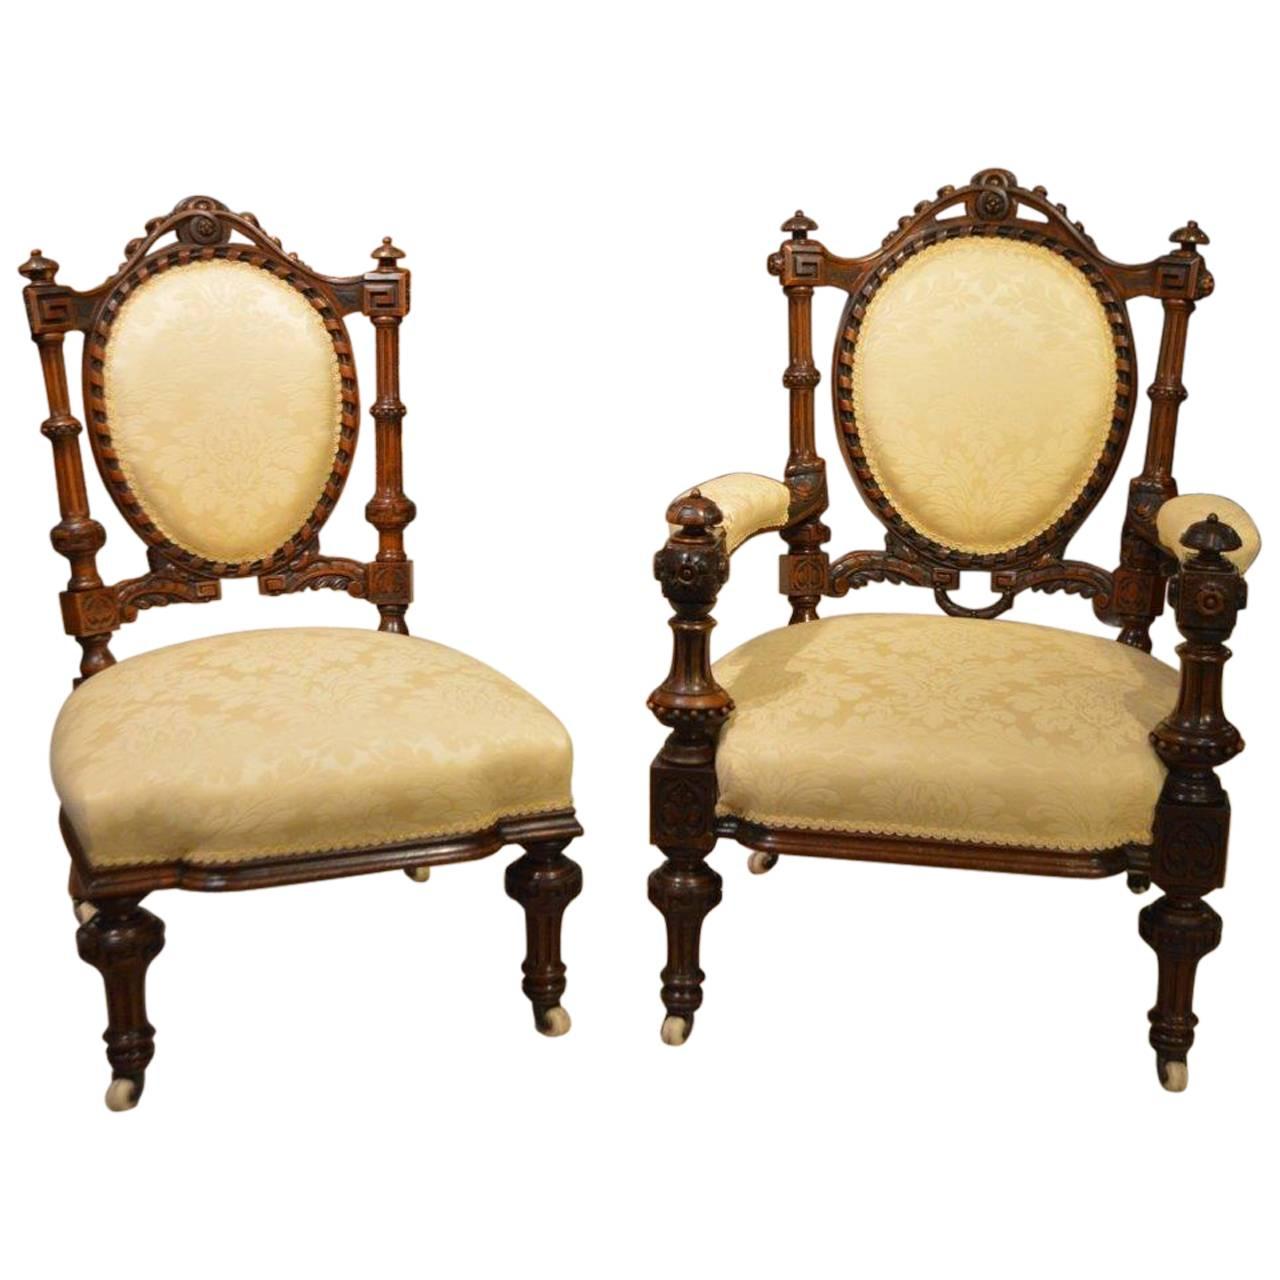 Stunning Quality Carved Walnut Victorian Period Ladies and Gents Chairs